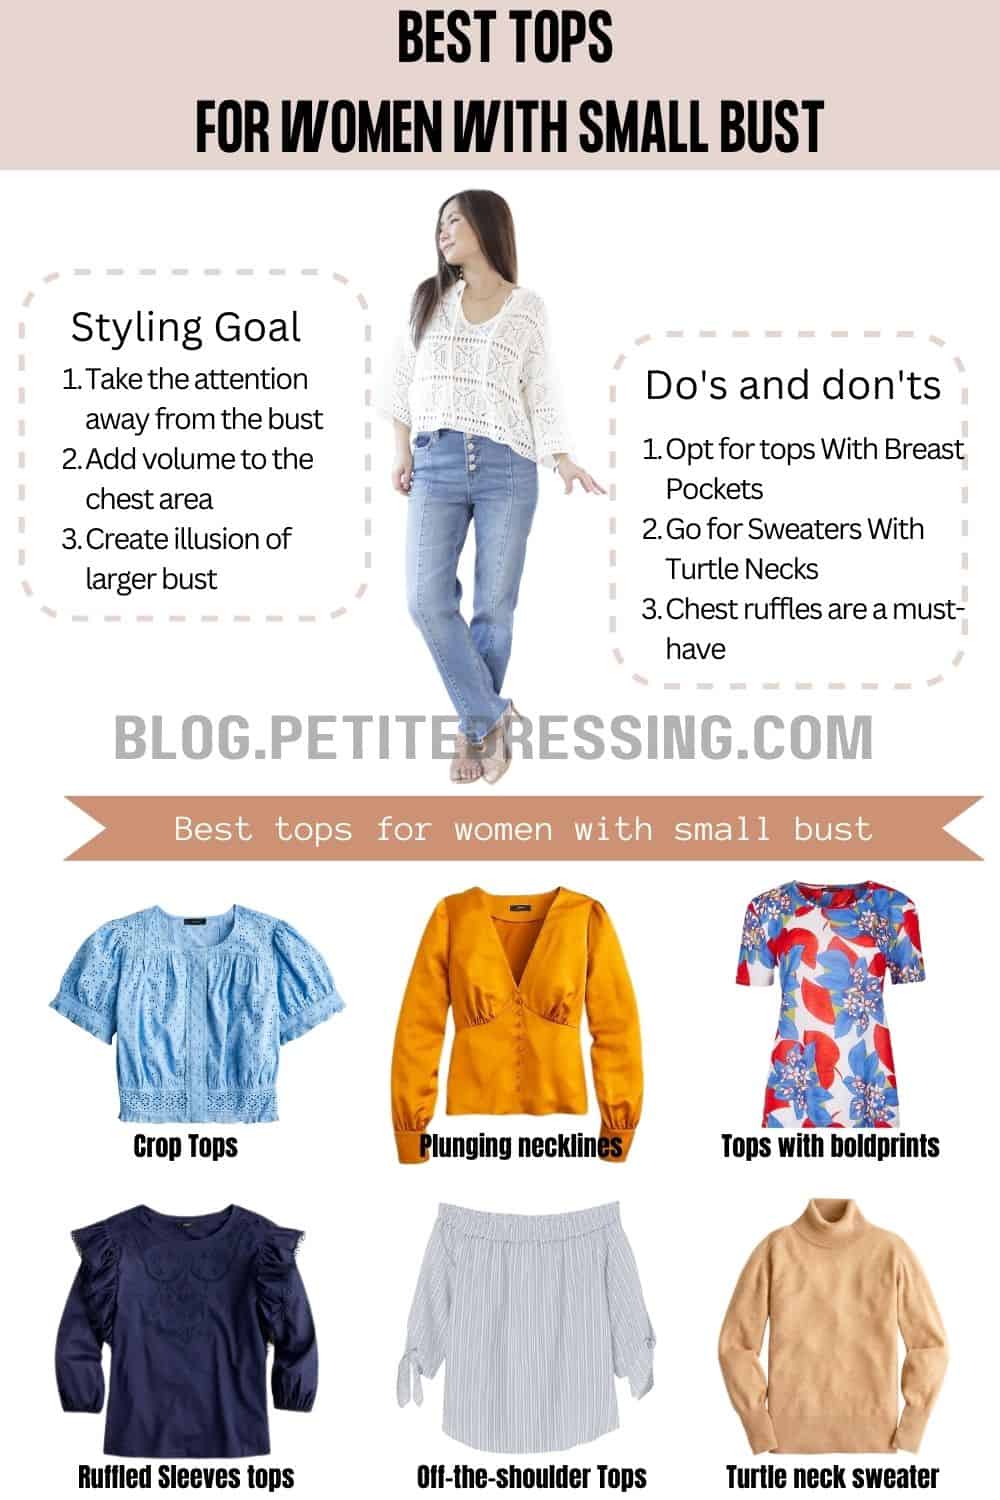 The Complete Tops Guide for Women With Small Bust